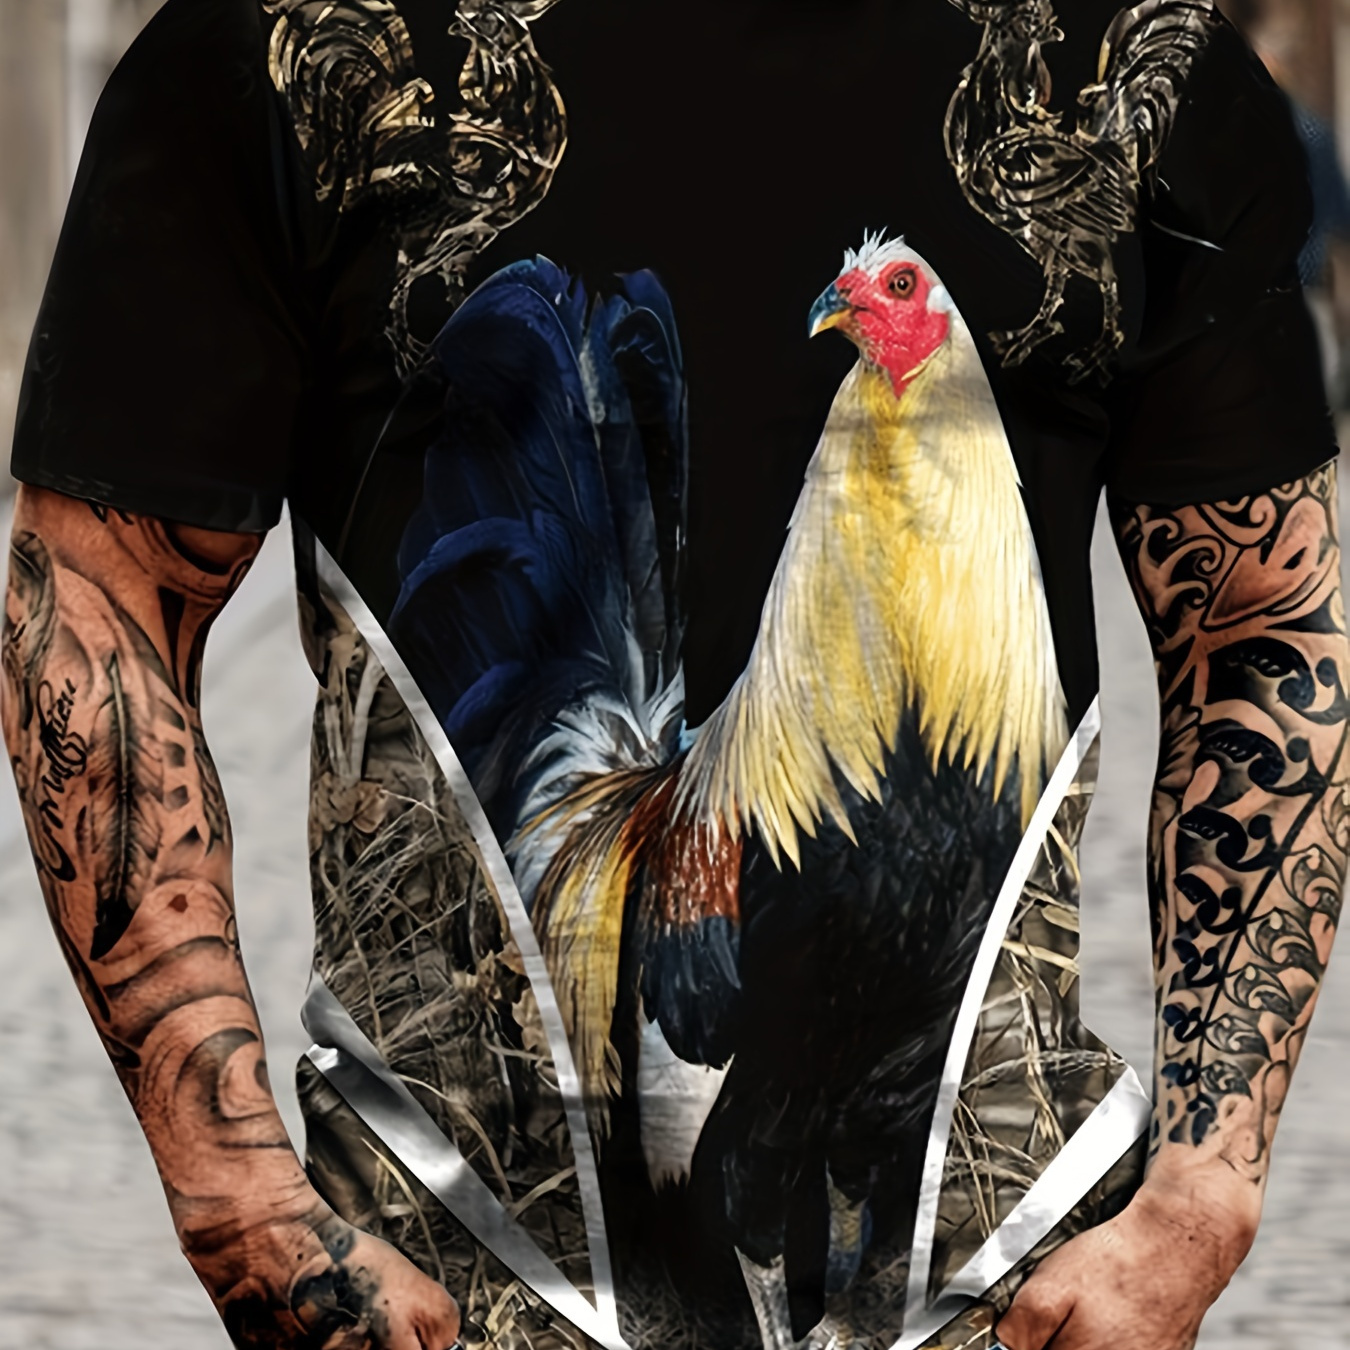 

Cock 3d Print Men's Short Sleeve Casual T Shirt, Crew Neck Animal Graphic Tee European And American Fashion Loungewear Pajamas Top Daily Tops